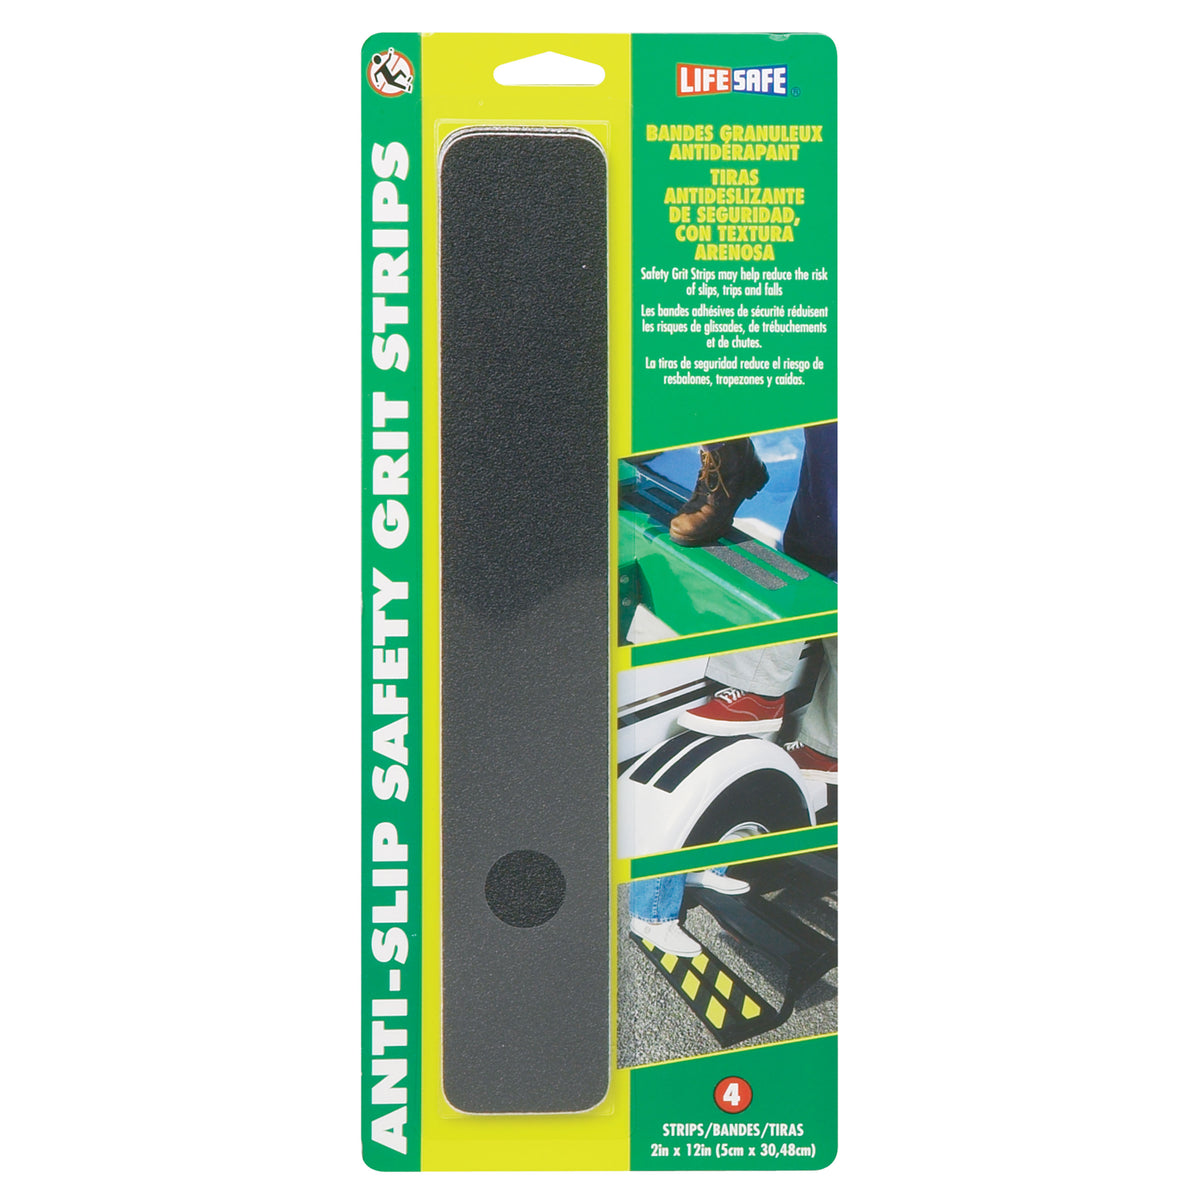 Life Safe RE3950 Anti-Slip Safety Grit Strip - 1 in. x 15 ft. Roll